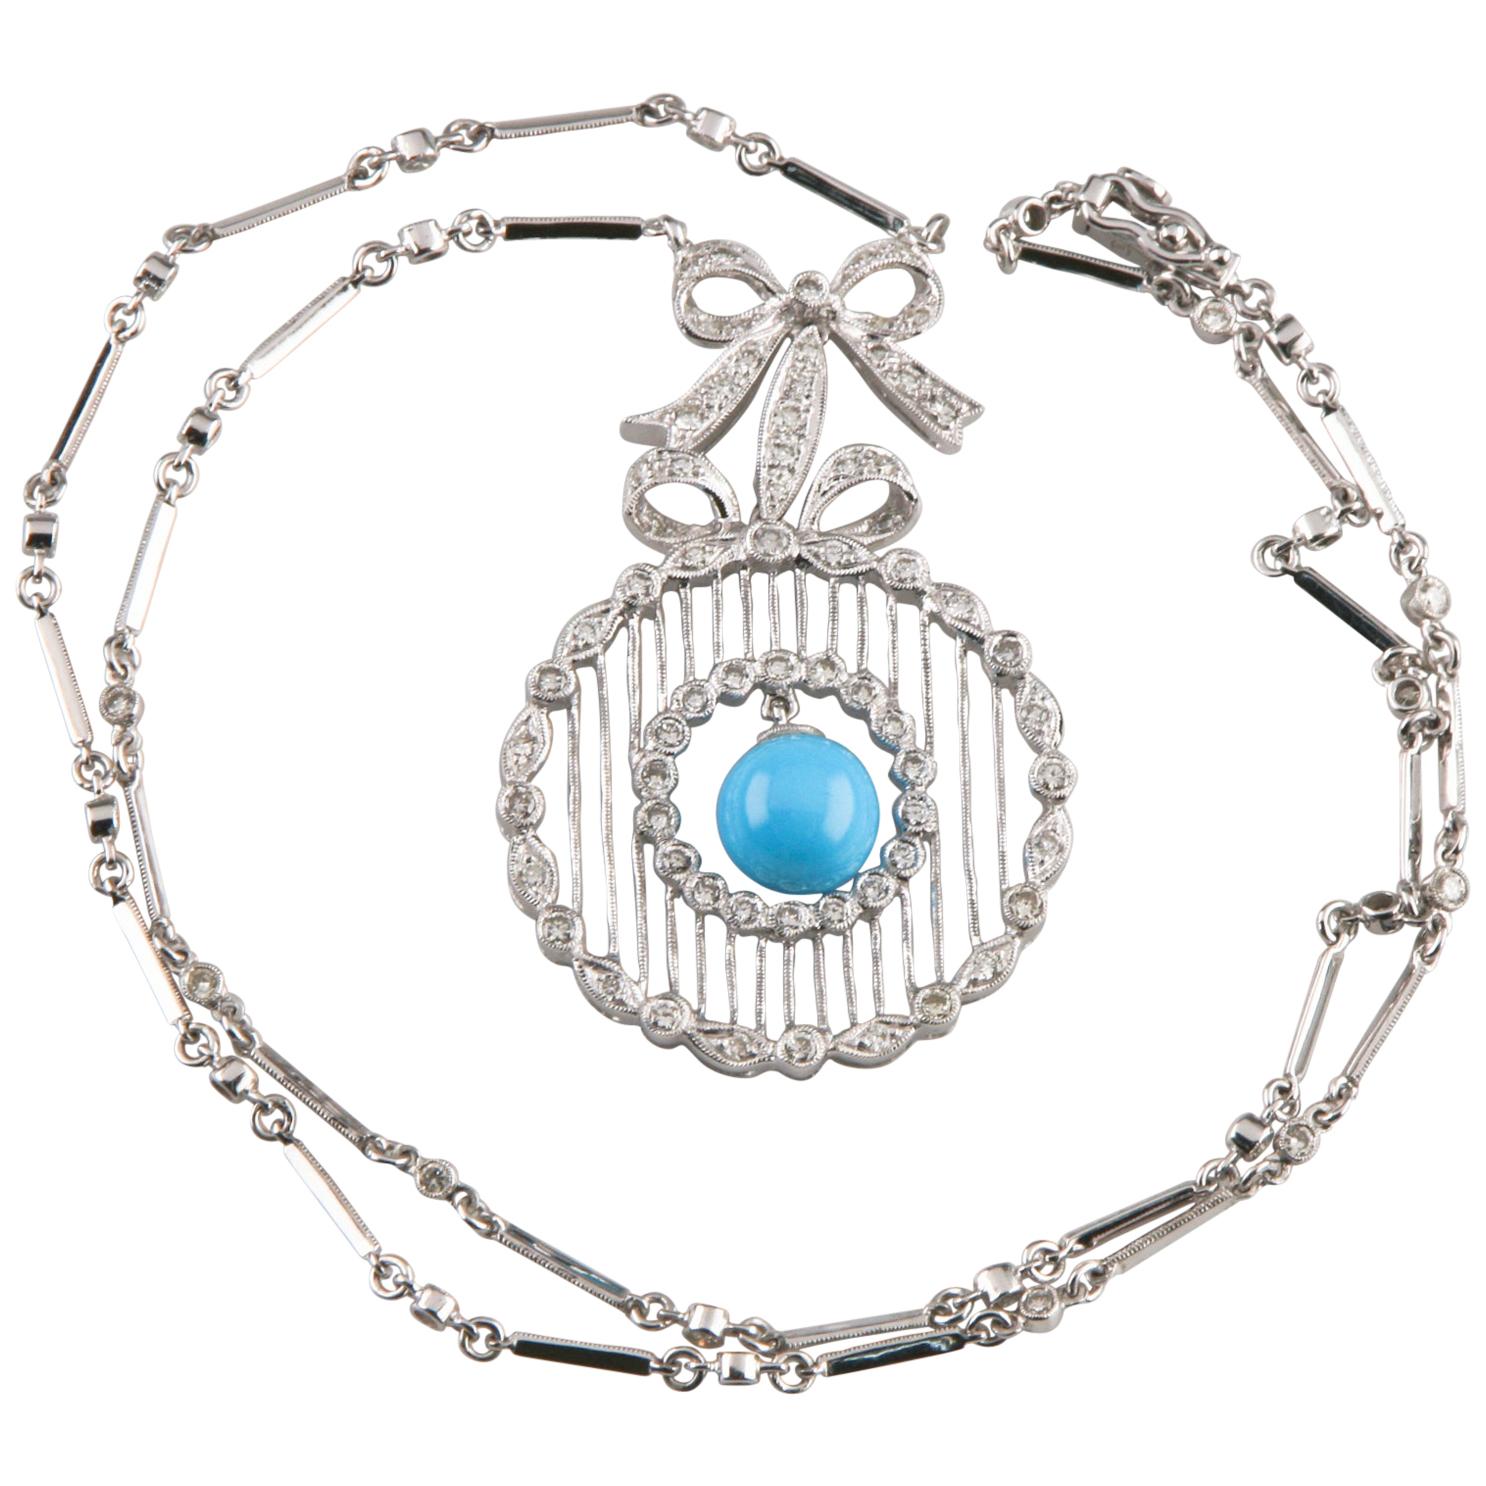 Diamond and Turquoise Necklace with Ribbon Bow Design Set in 18 Karat White Gold For Sale